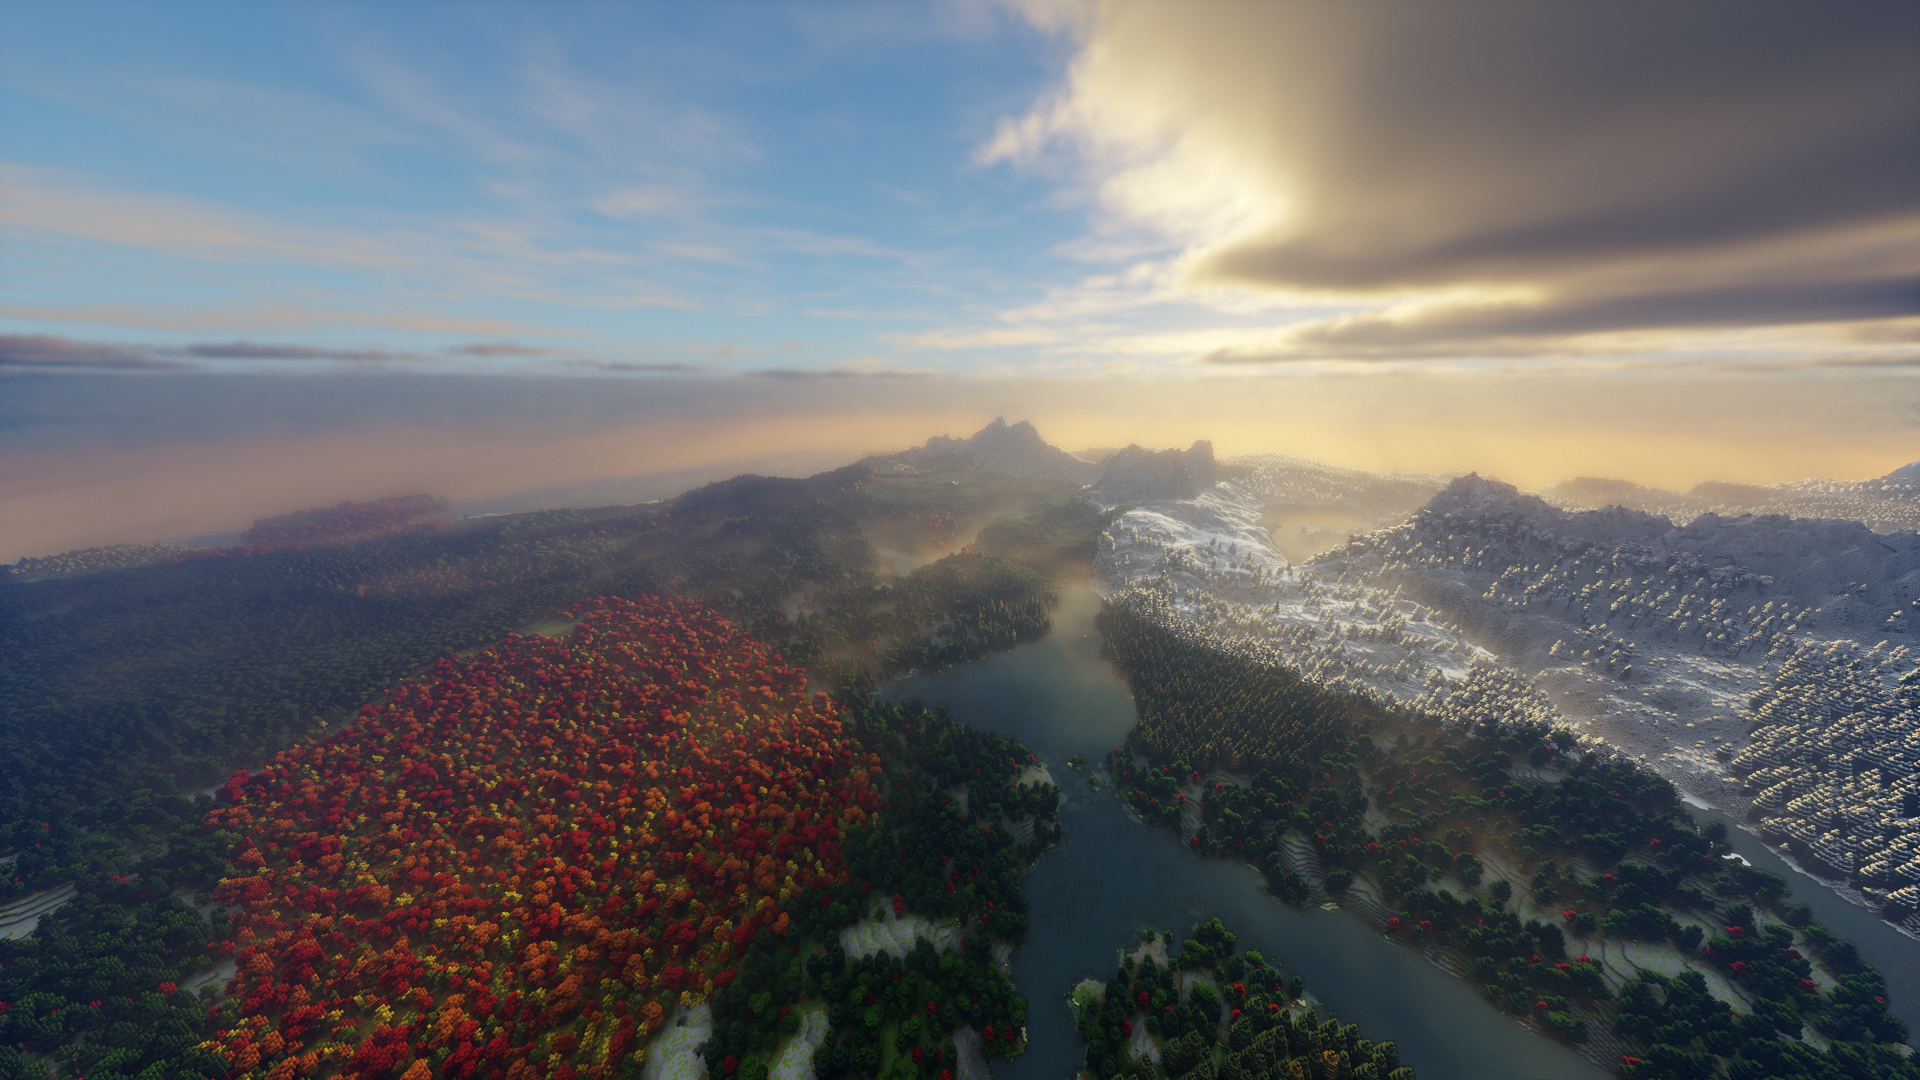 Tried to load 1024 chunk render distance, DIDN'T WORK